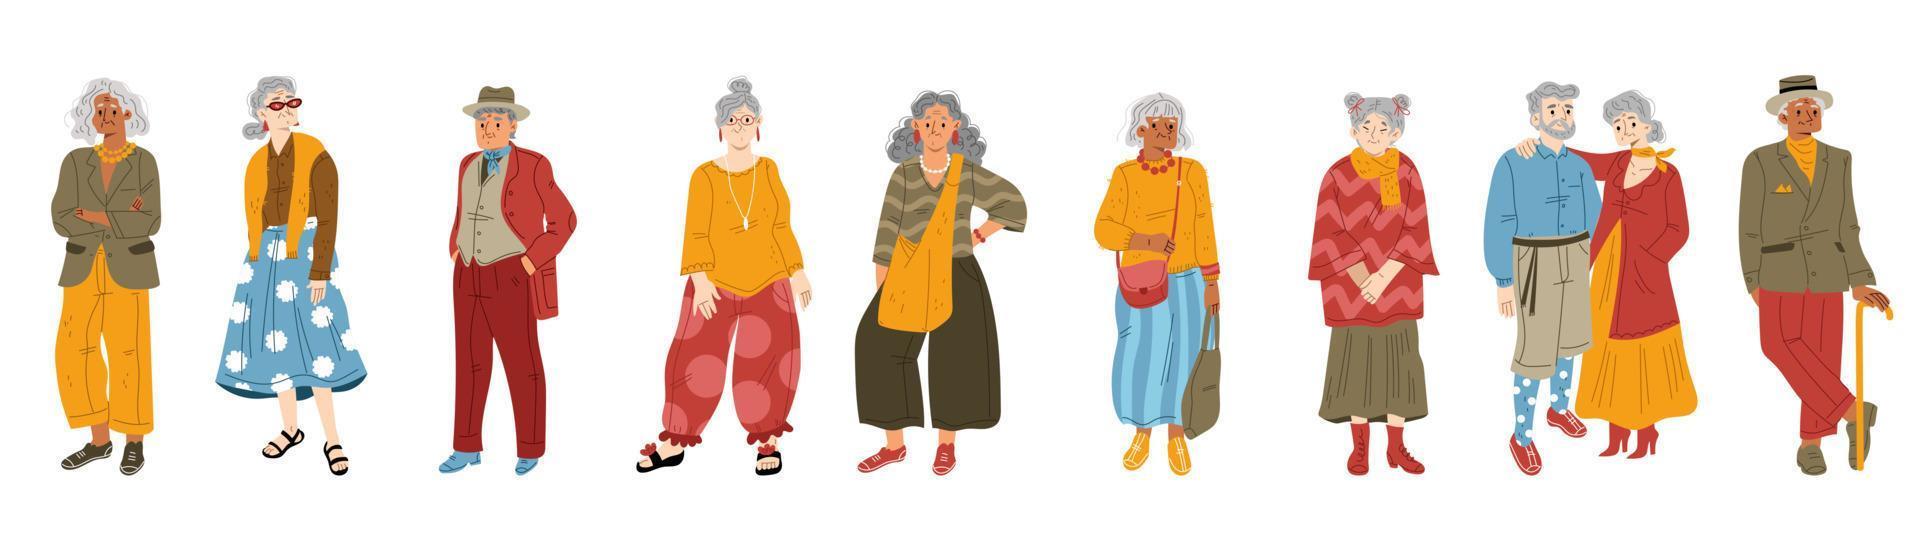 Modern old people in fashion clothes vector